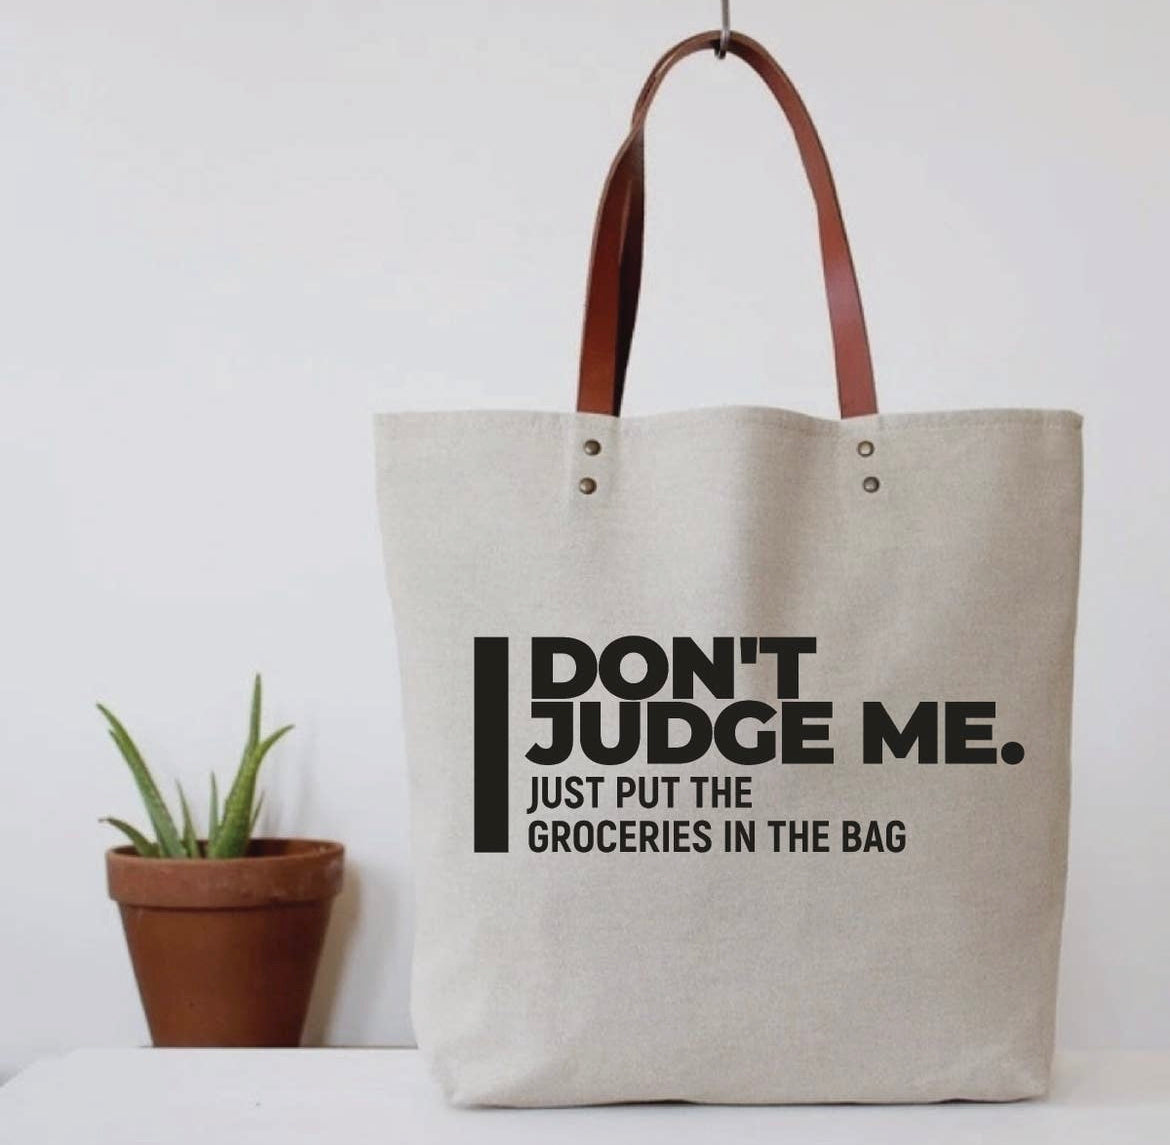 Don’t Judge Me. Grocery Bag